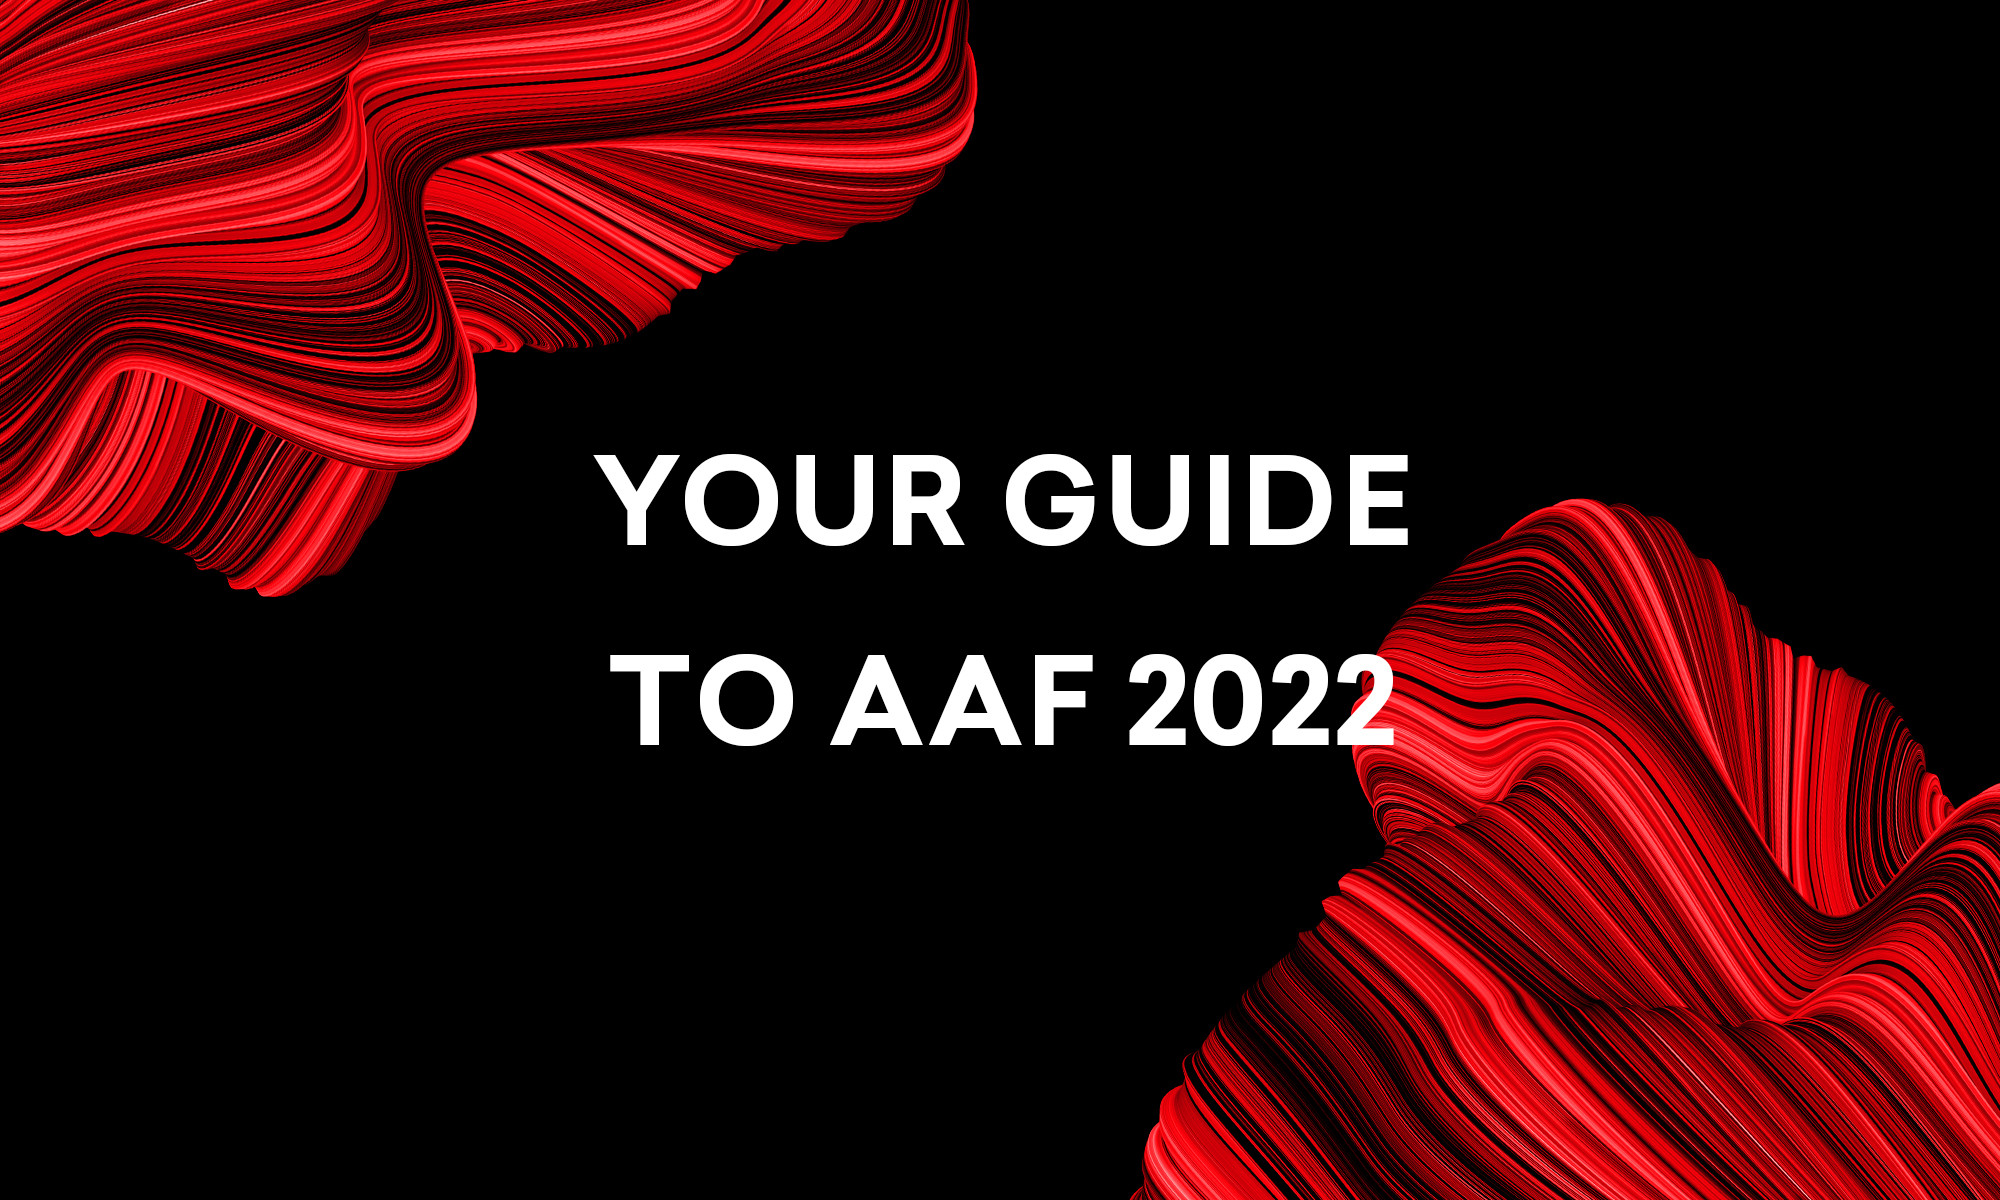 Your Daily Guide to AAF 2022